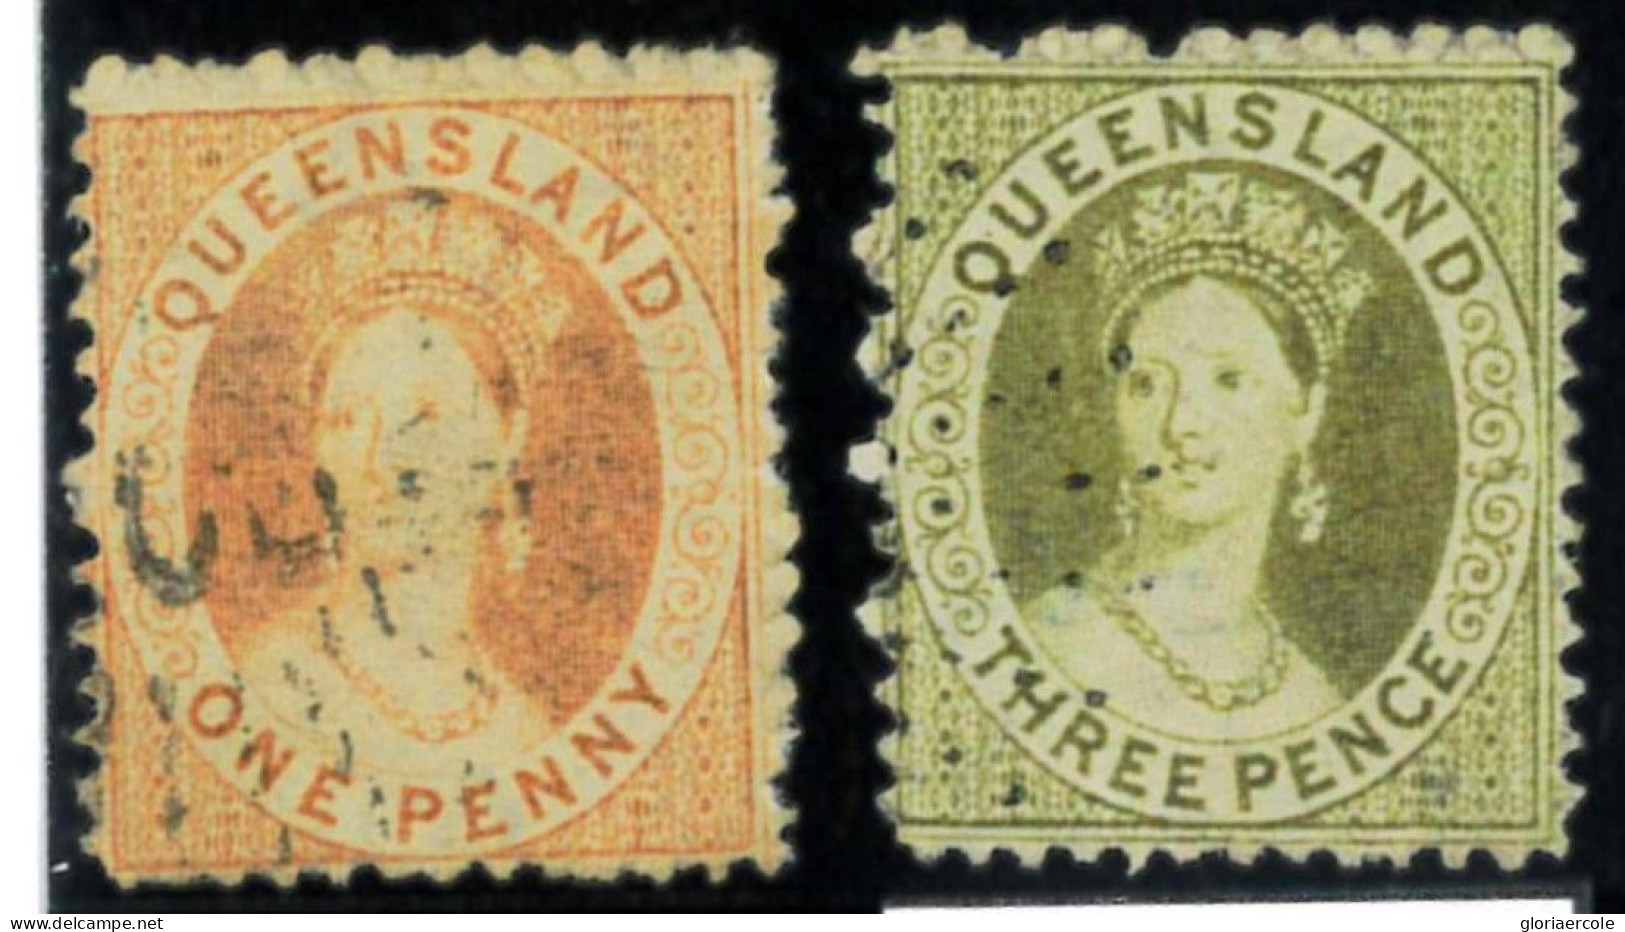 P1706 - QUEENSLAND , SG 59 + 65 VFU - Used Stamps